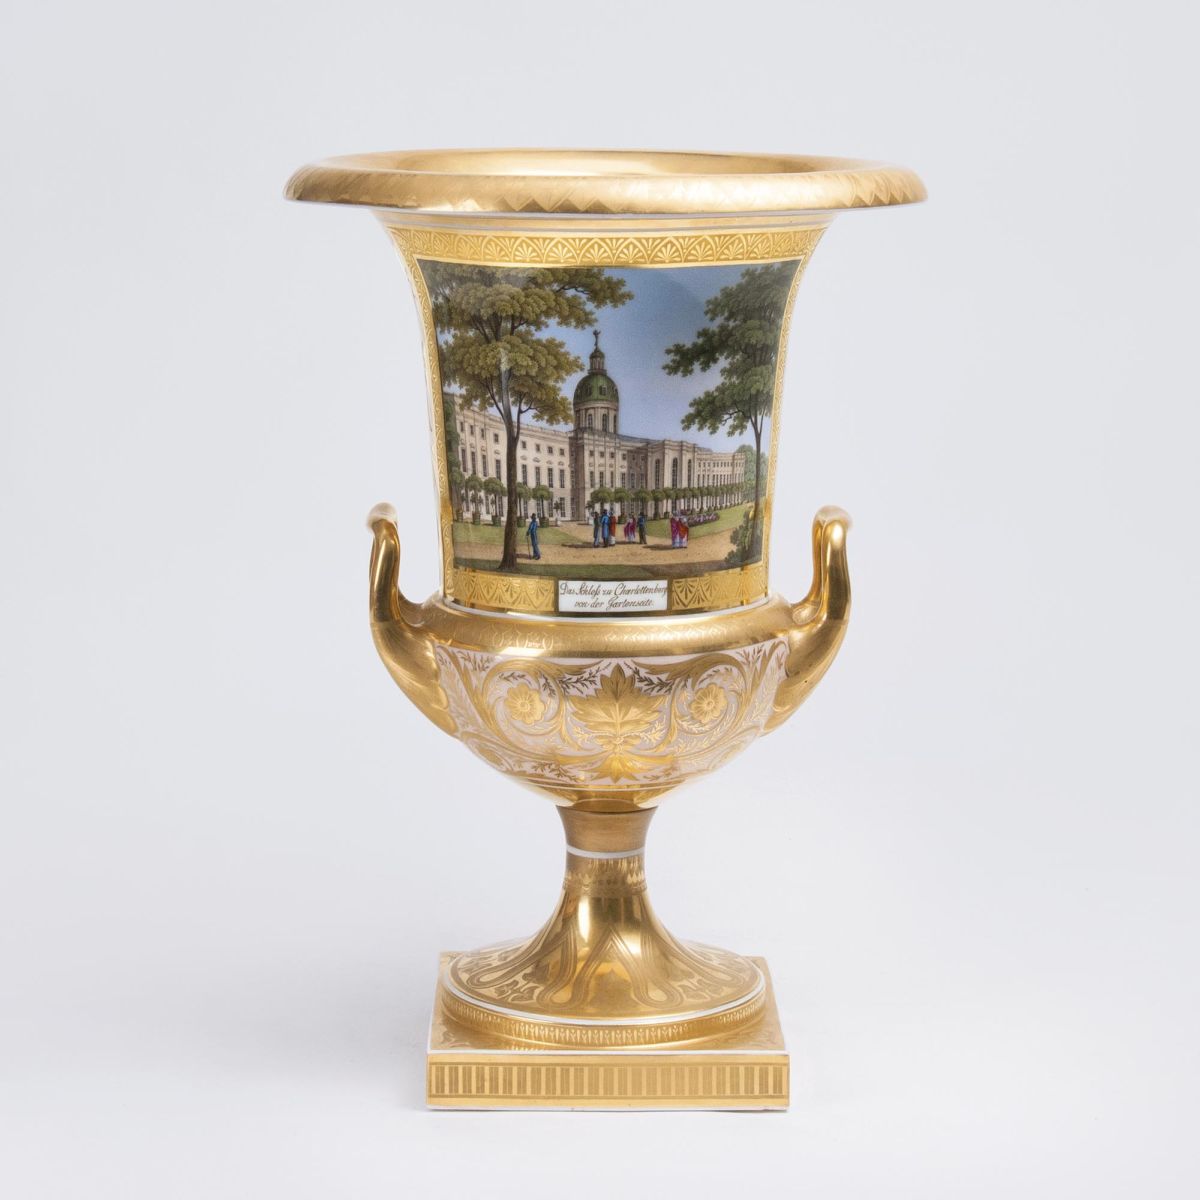 A rare Crater Vase with Views of Charlottenburg Palace and Isle of Louise in Berlin